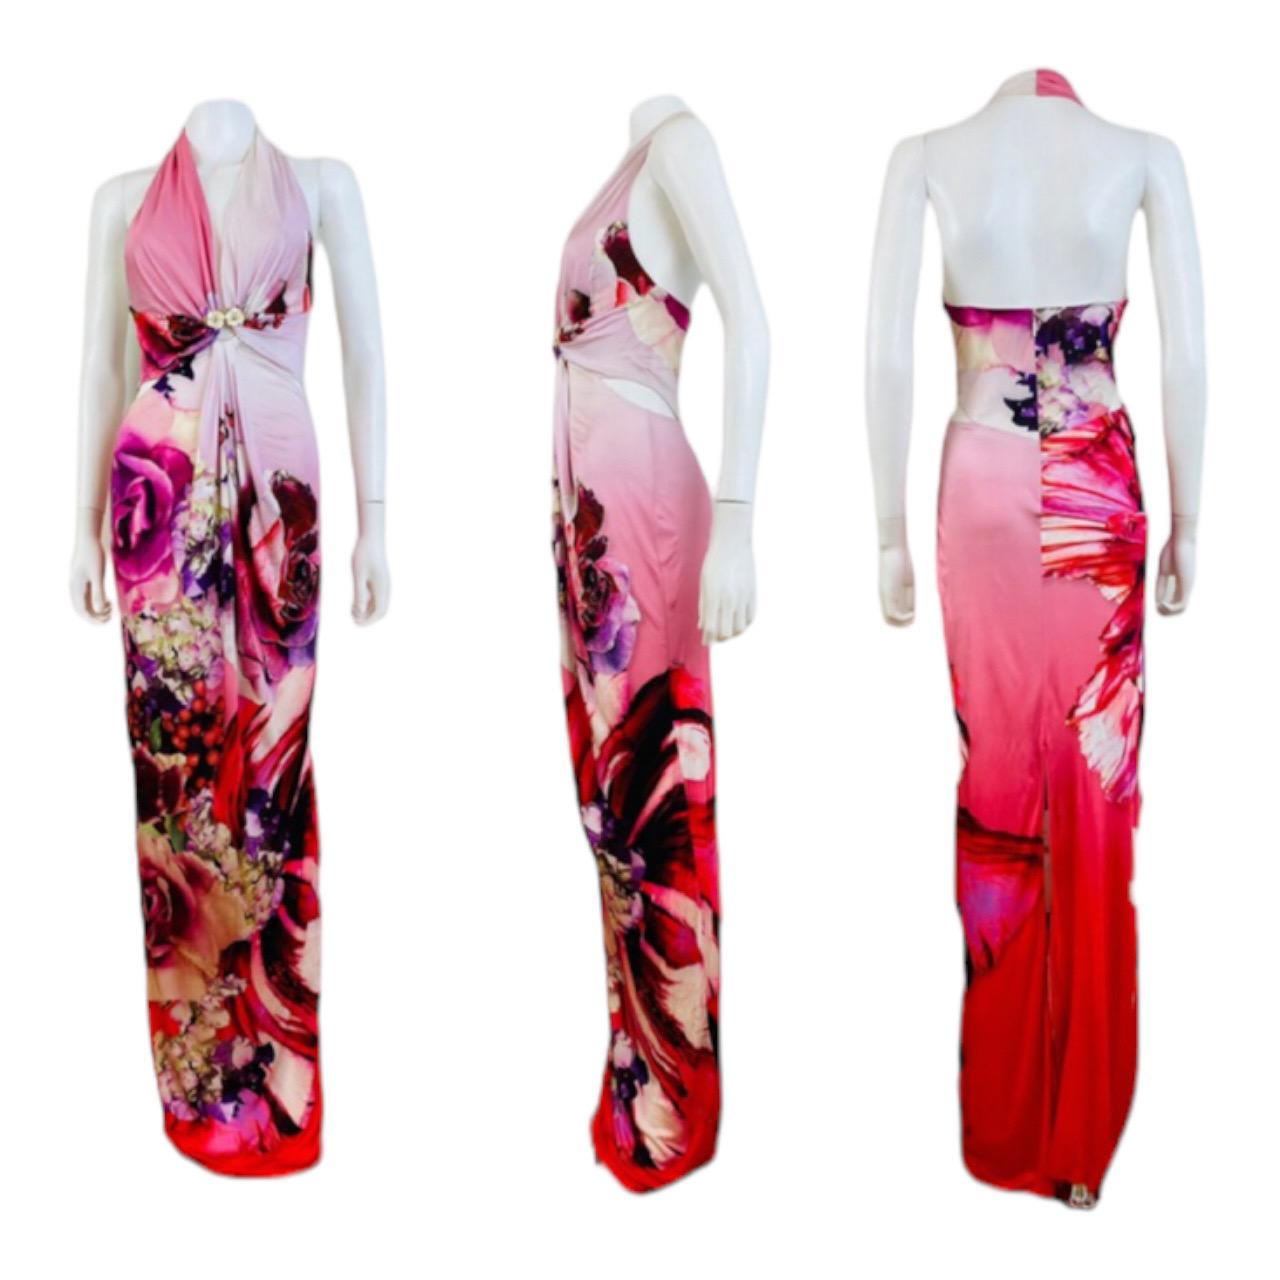 Stunning Roberto Cavalli Dress
Super bold oversized dramatic floral print on slinky viscose fabric
Roberto Cavalli signature appears in several spots throughout the dress
Halter neckline slips overhead
Plunging bodice with cream enamel flowers on